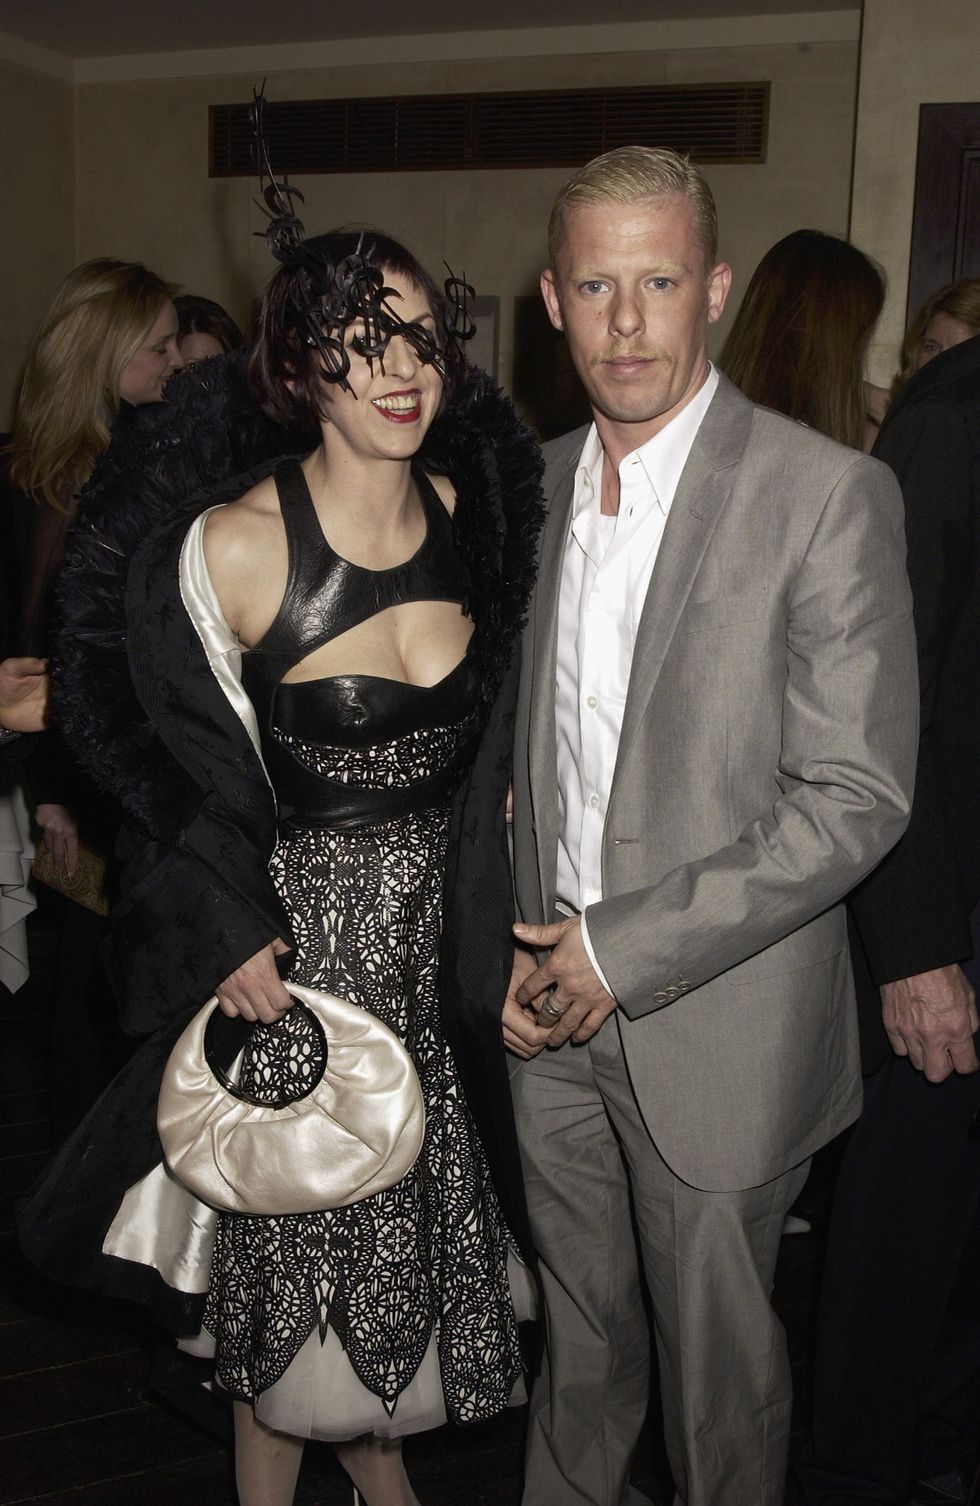 london march 19 designer alexander mcqueen and isabella blow attend the tatler dinner at floriana, at the beauchamp place on march 19, 2003 photos by dave benett